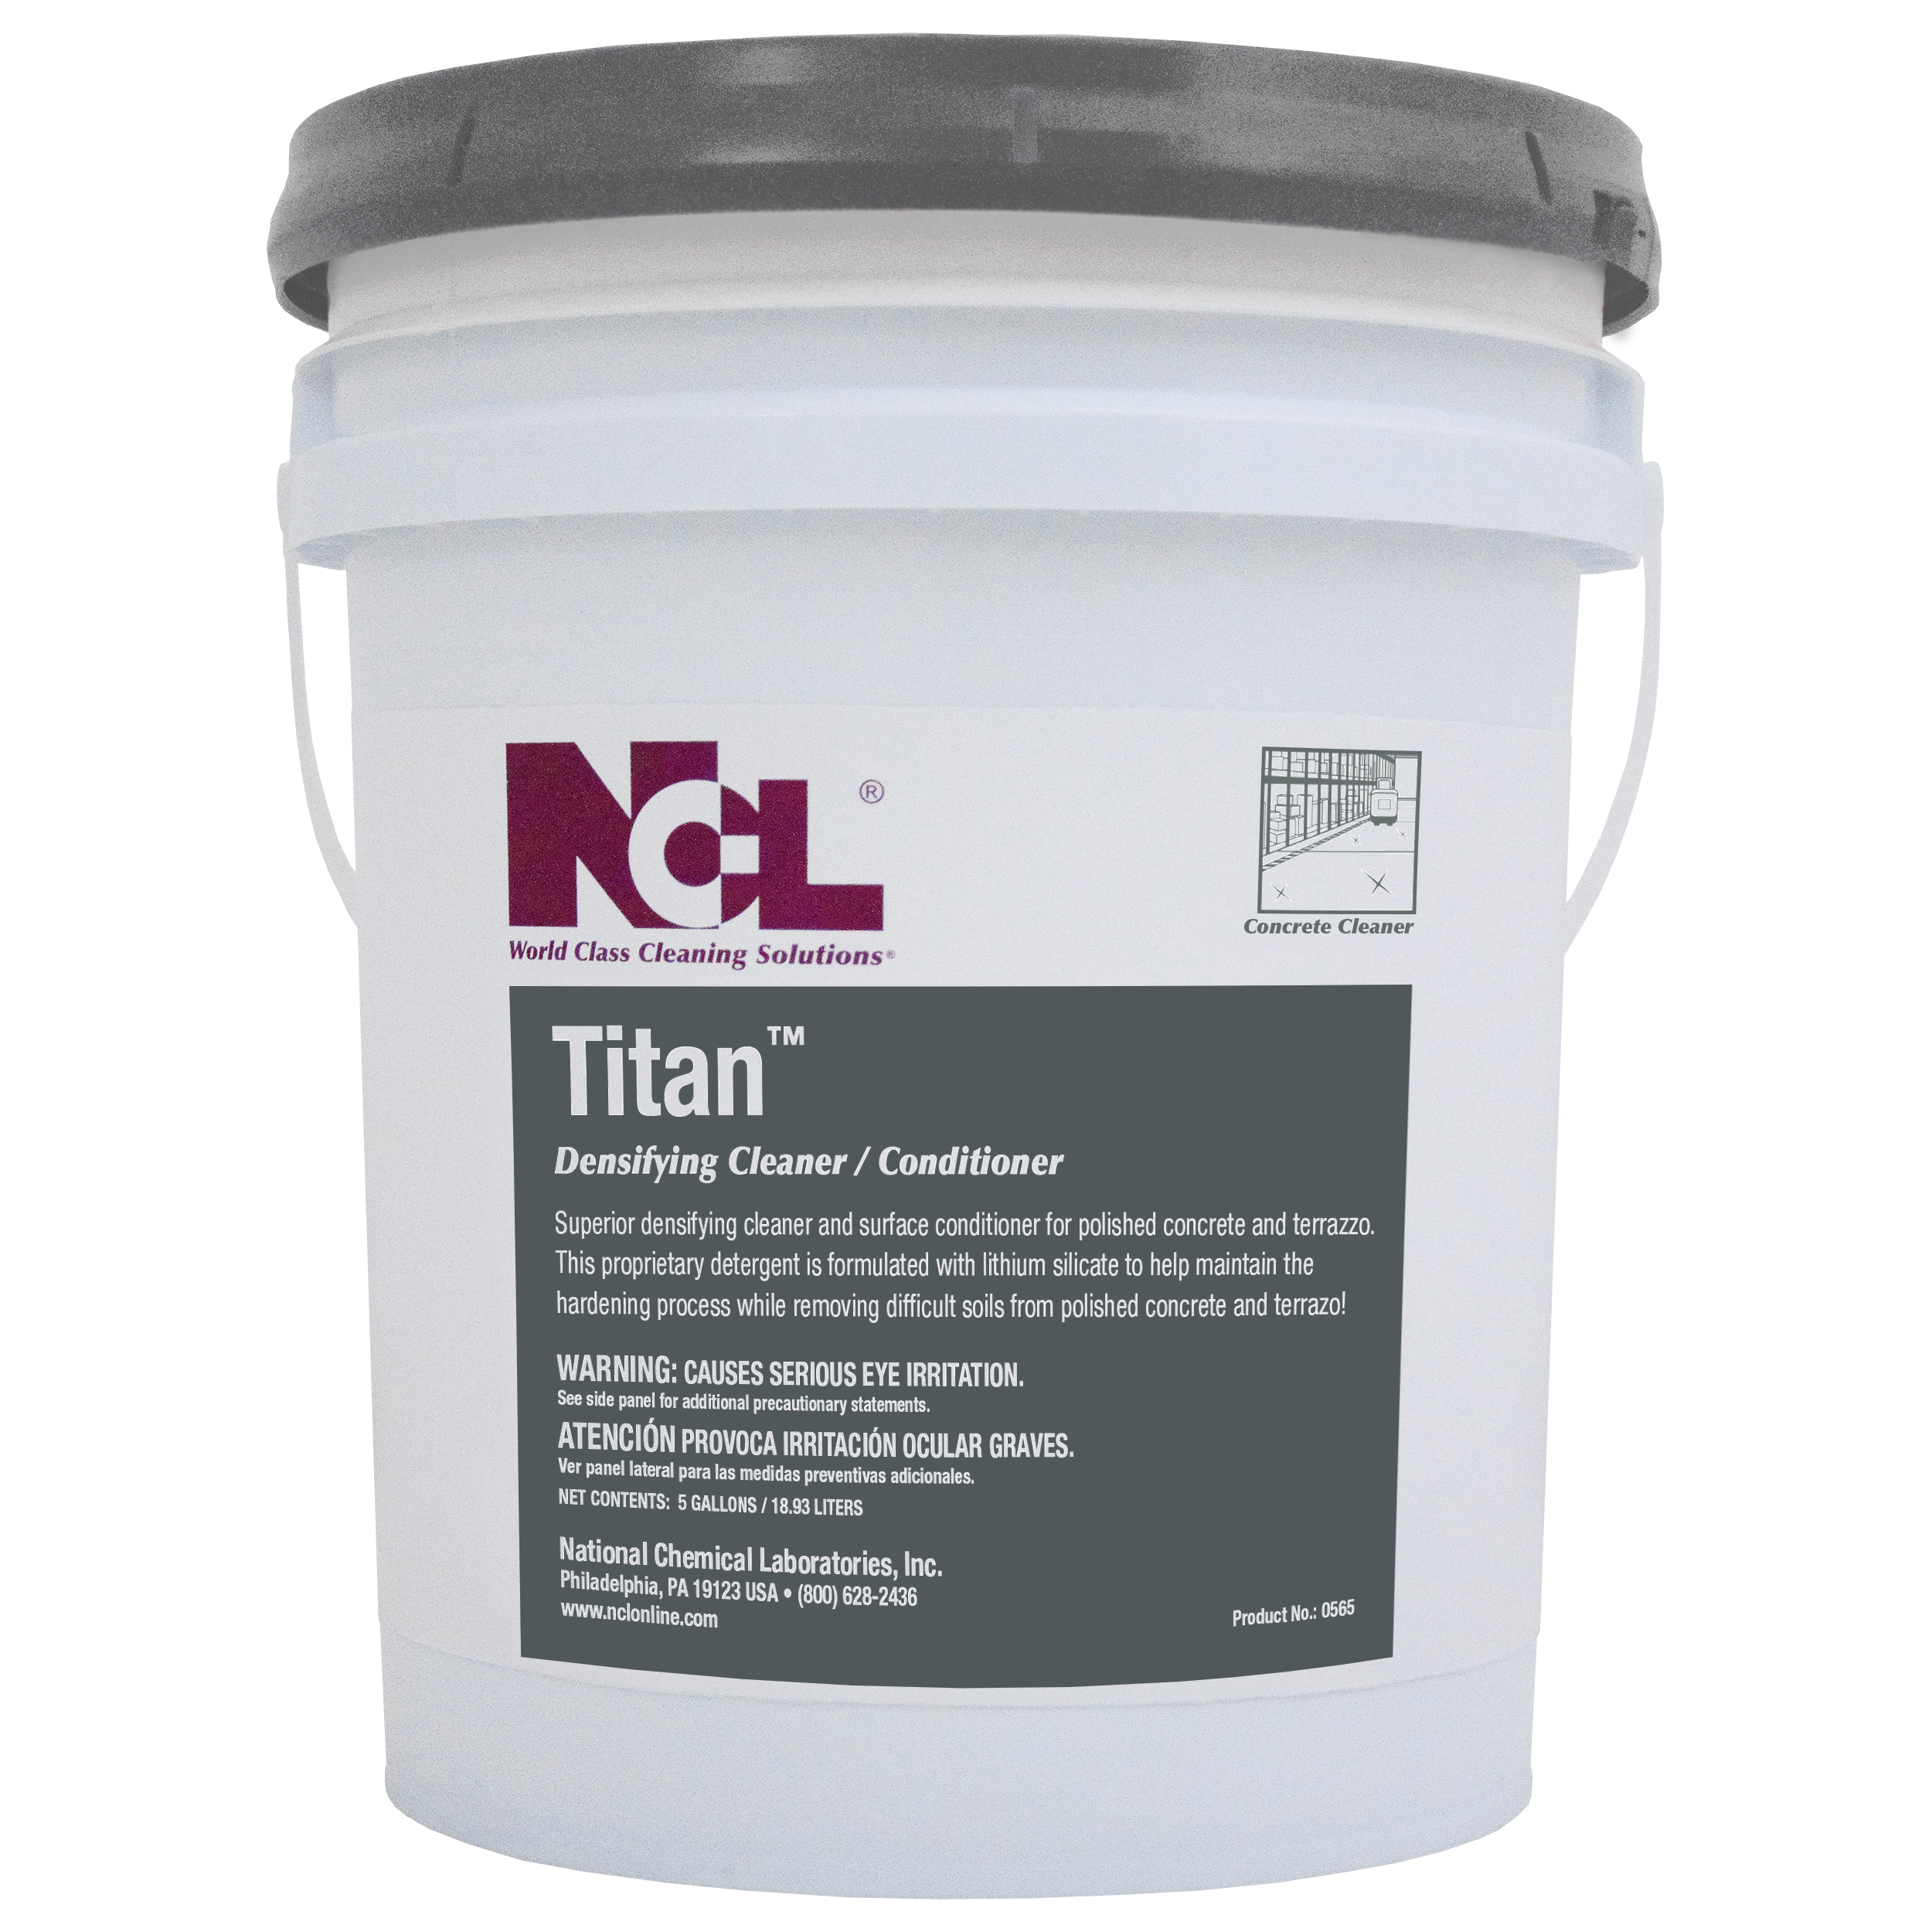  TITAN Densifying Cleaner / Conditioner 5 Gal. Pail (NCL0565-21) 